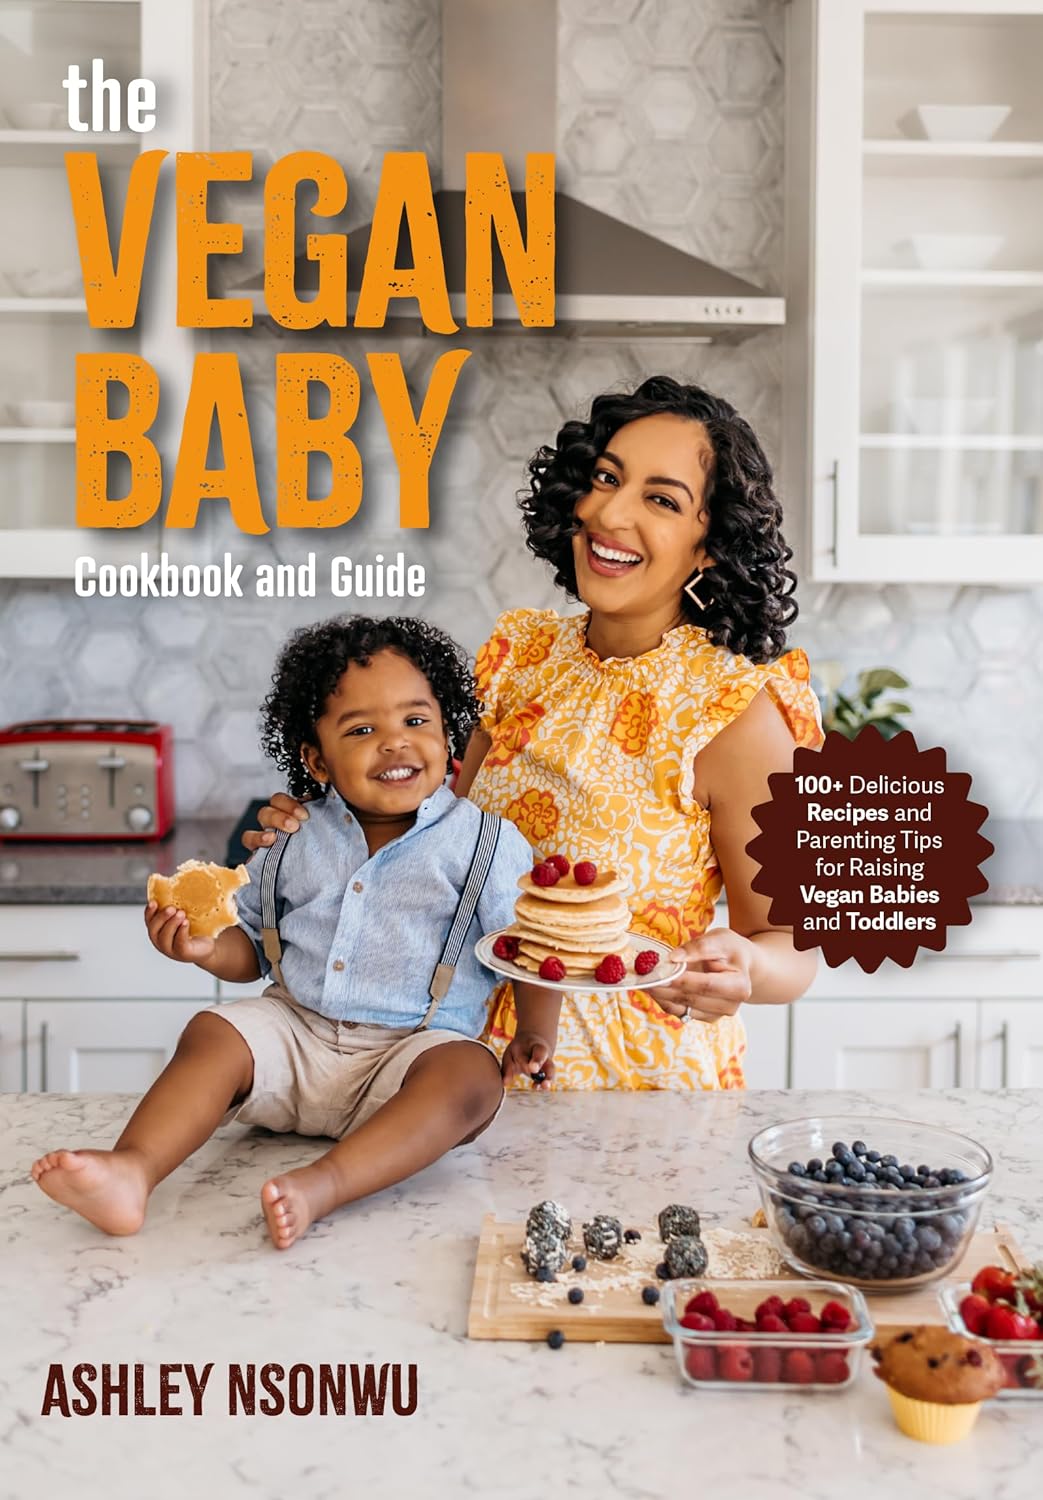 The Vegan Baby Cookbook and Guide: 100+ Delicious Recipes and Parenting Tips for Raising Vegan Babies and Toddlers (Food for Toddlers